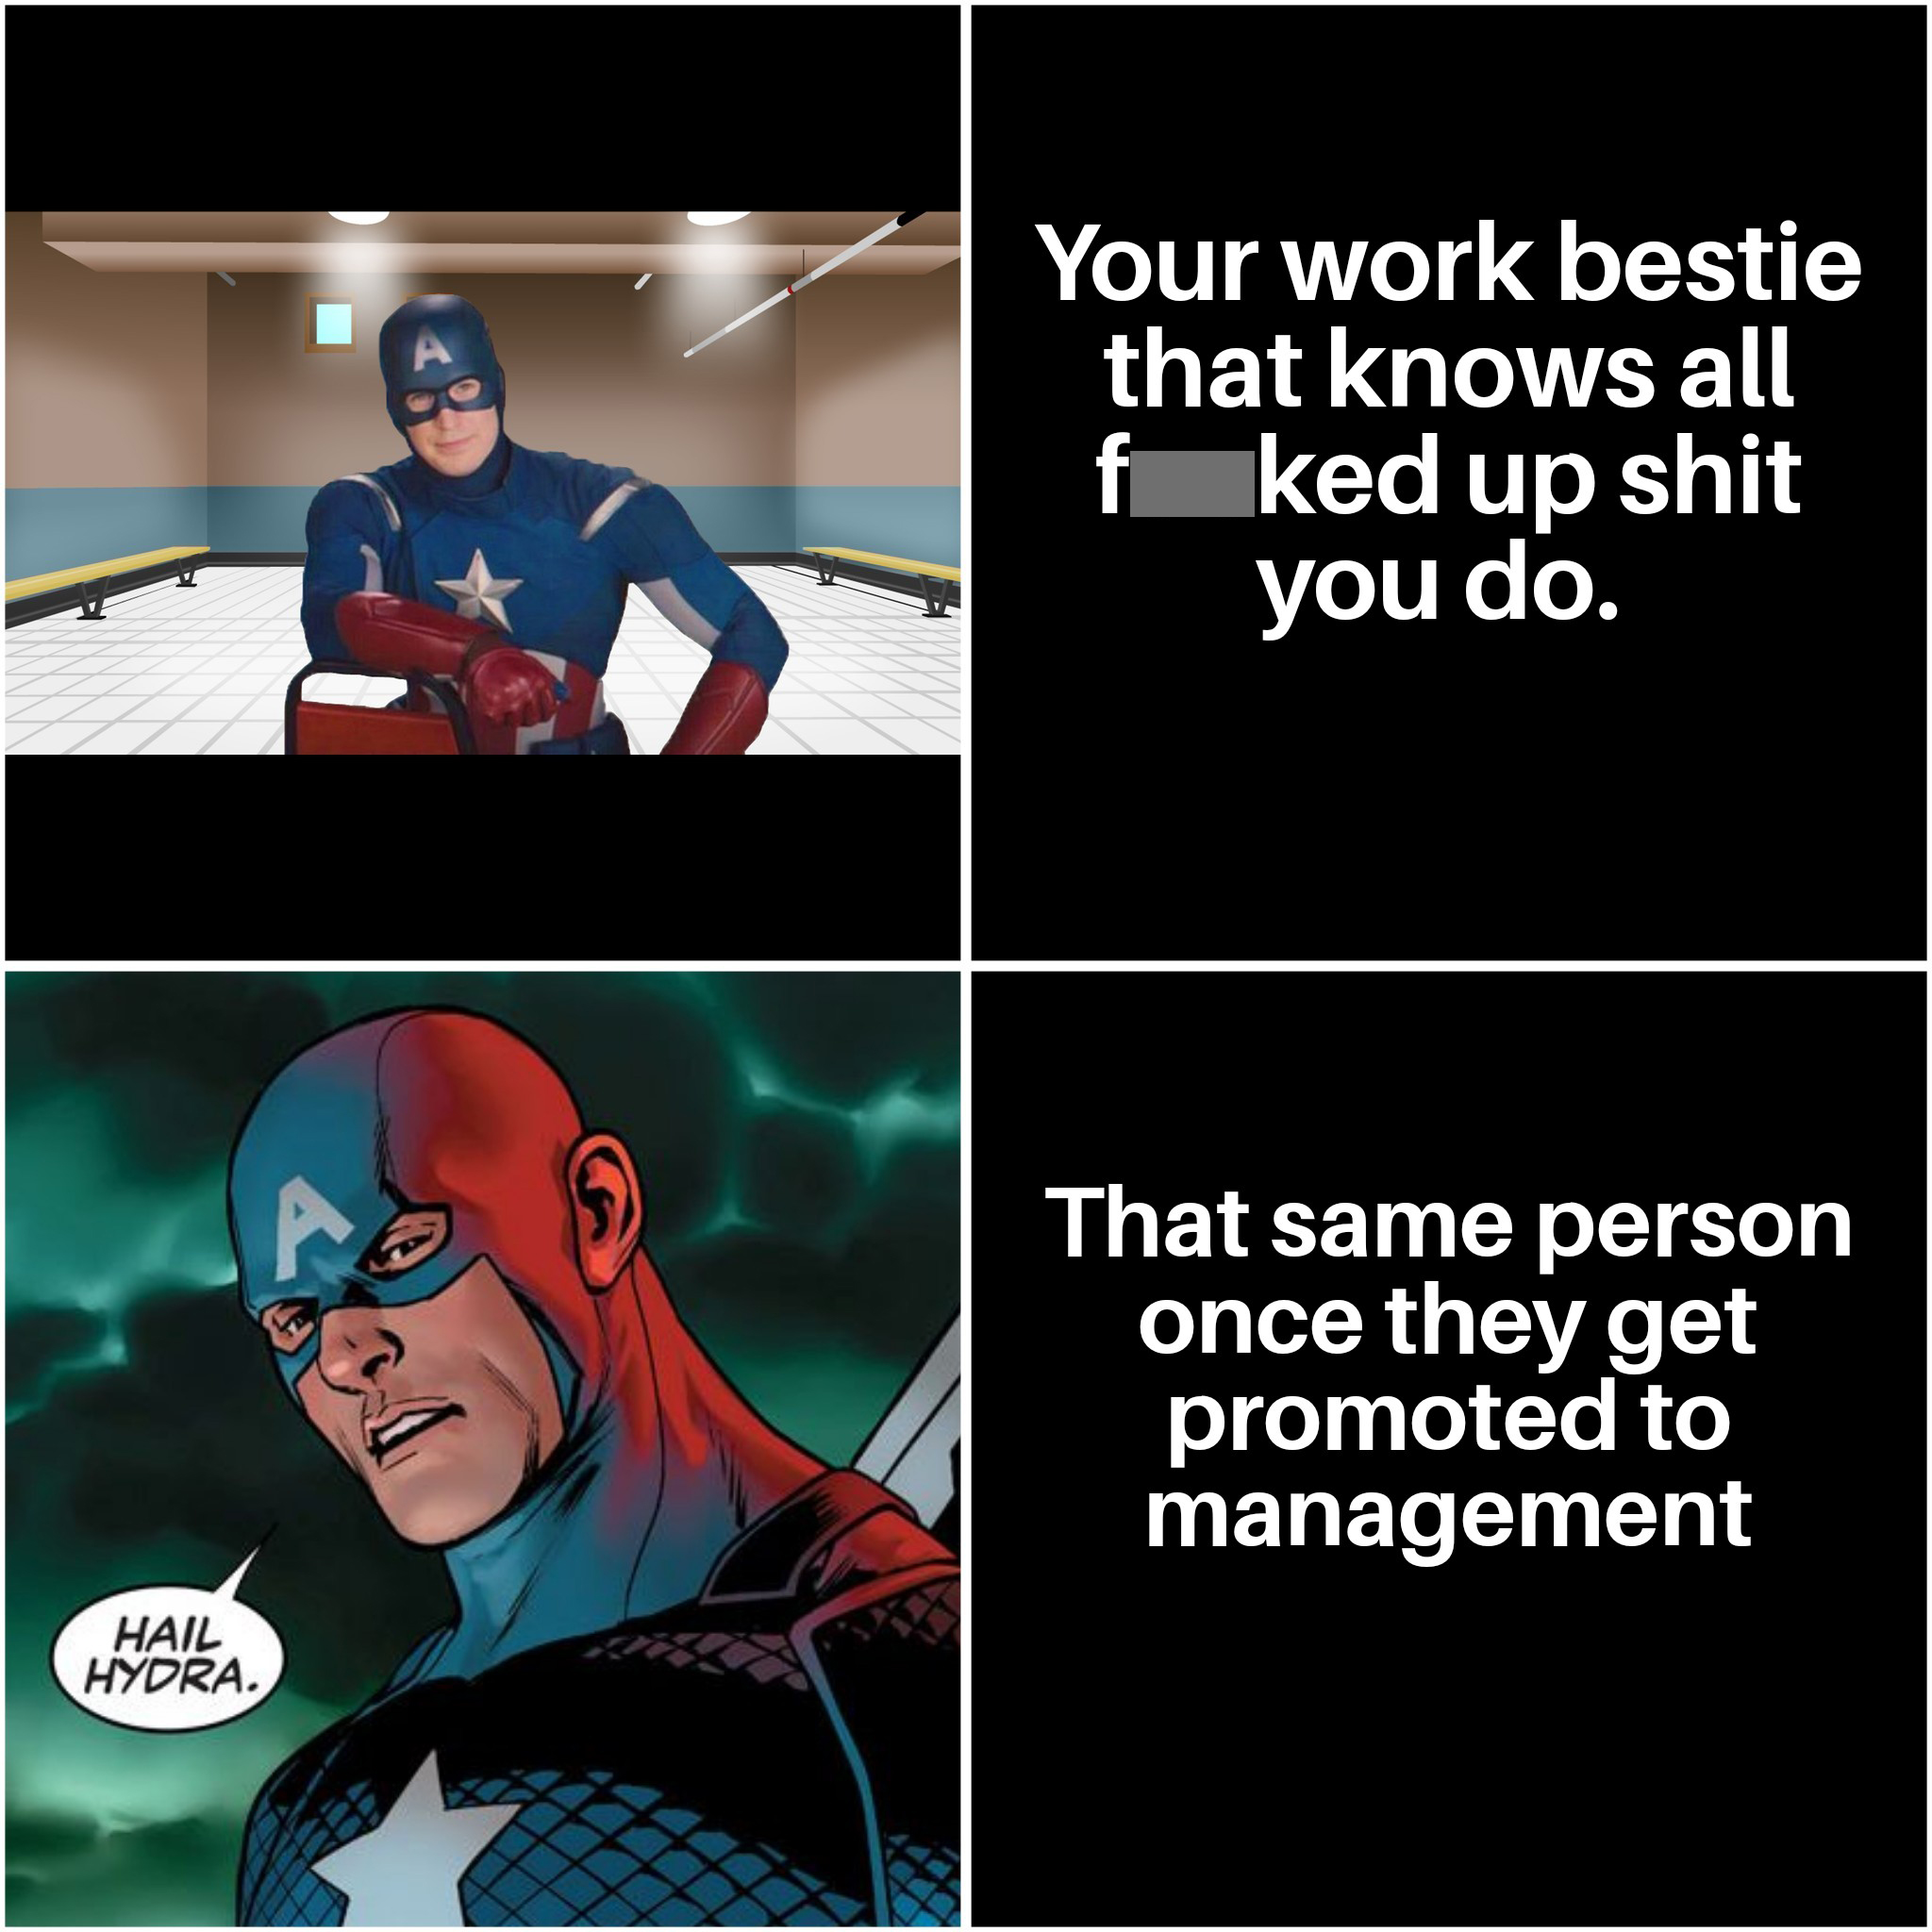 dank memes - funny memes - captain america hydra agent - Your work bestie that knows all f ked up shit you do. That same person once they get promoted to management Hail Hydra.